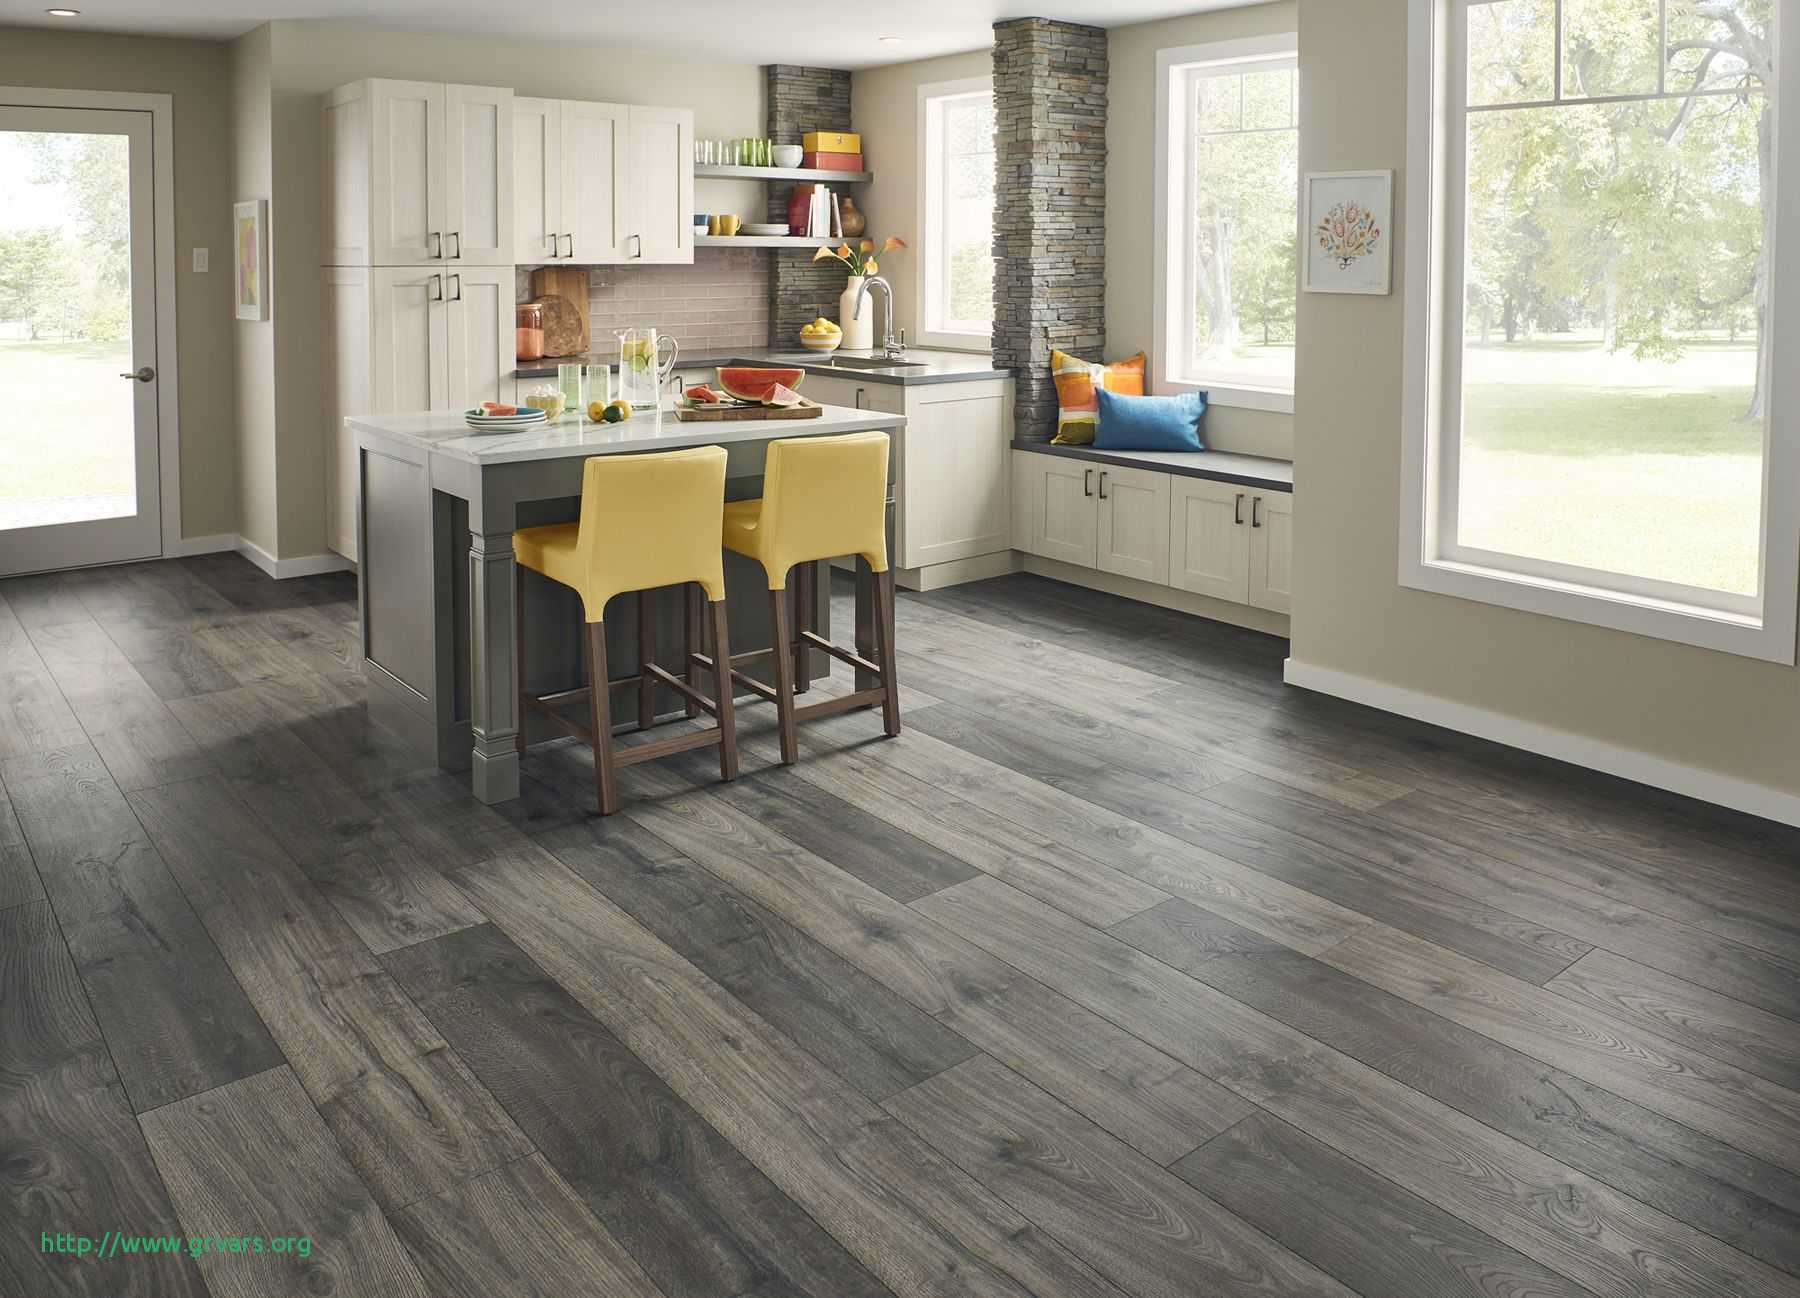 30 Stylish Armstrong Hardwood Flooring Reviews 2024 free download armstrong hardwood flooring reviews of 20 nouveau hazy hardwood floors ideas blog in 0d grace place barnegat hazy hardwood floors beau let your imagination roll with the smoky charcoal grays